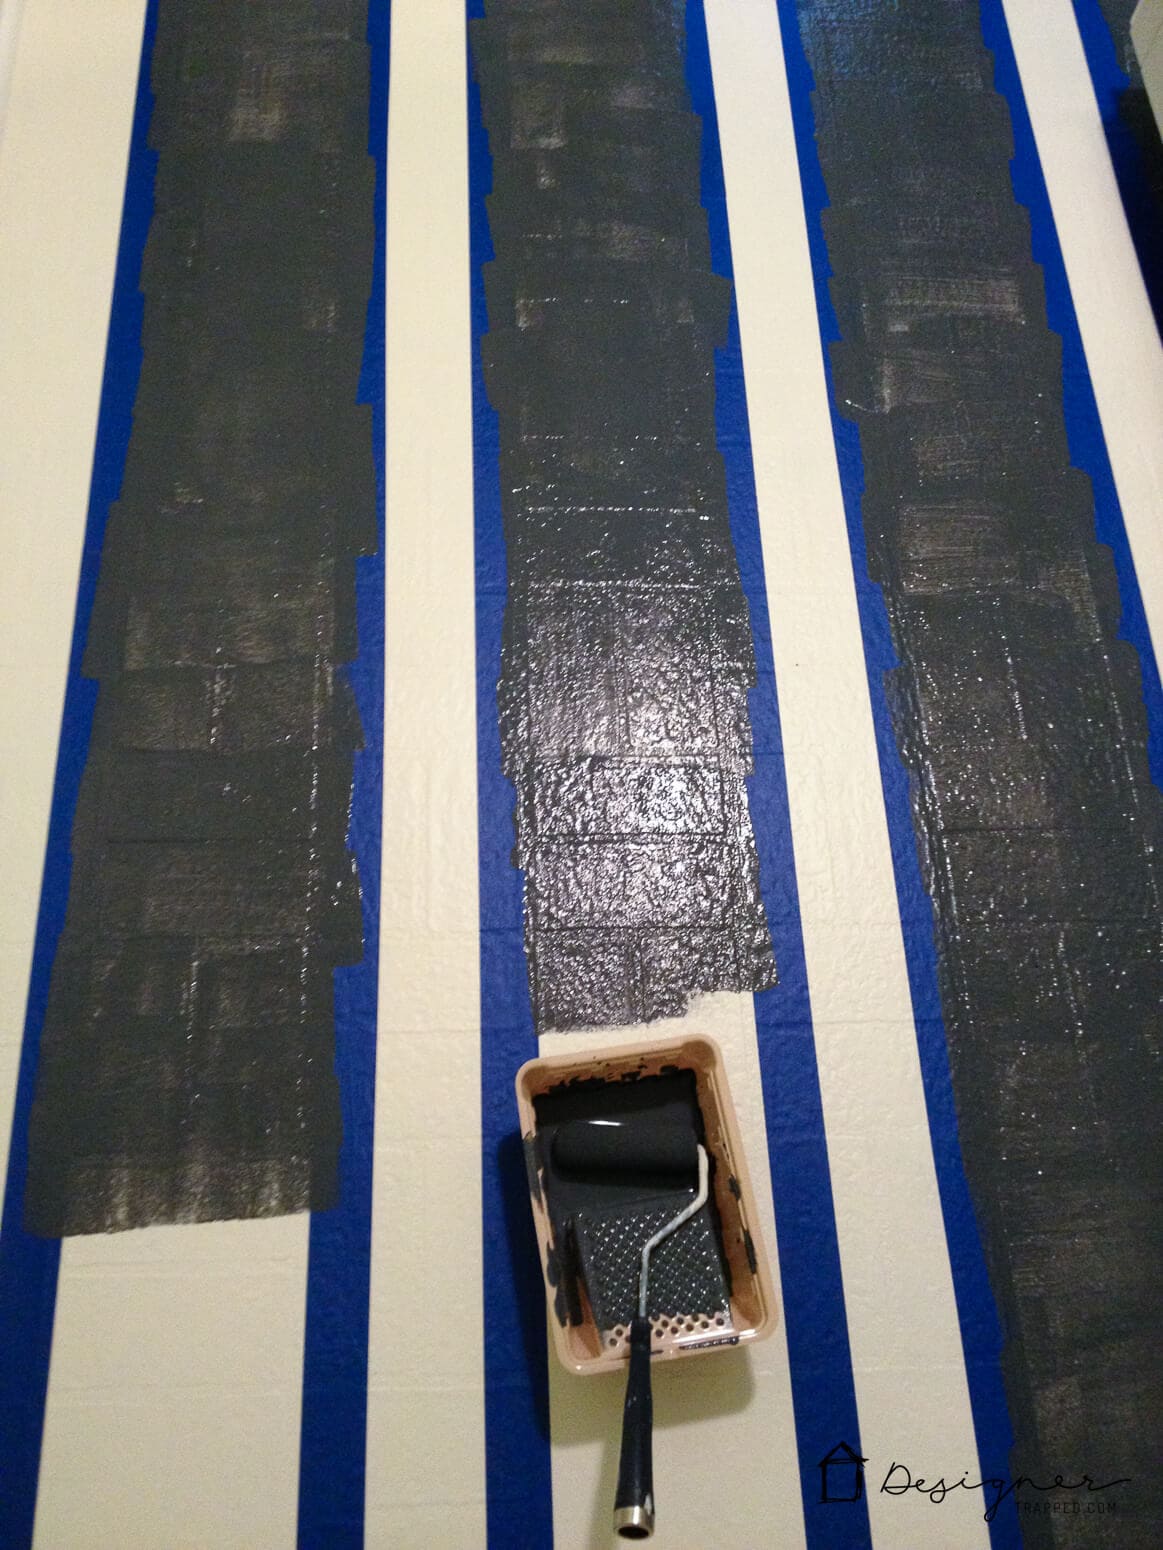 You don't have to live with old, outdated vinyl floors! You can learn how to paint vinyl floors in a way that will last for YEARS with this step-by-step tutorial. Click to read it!